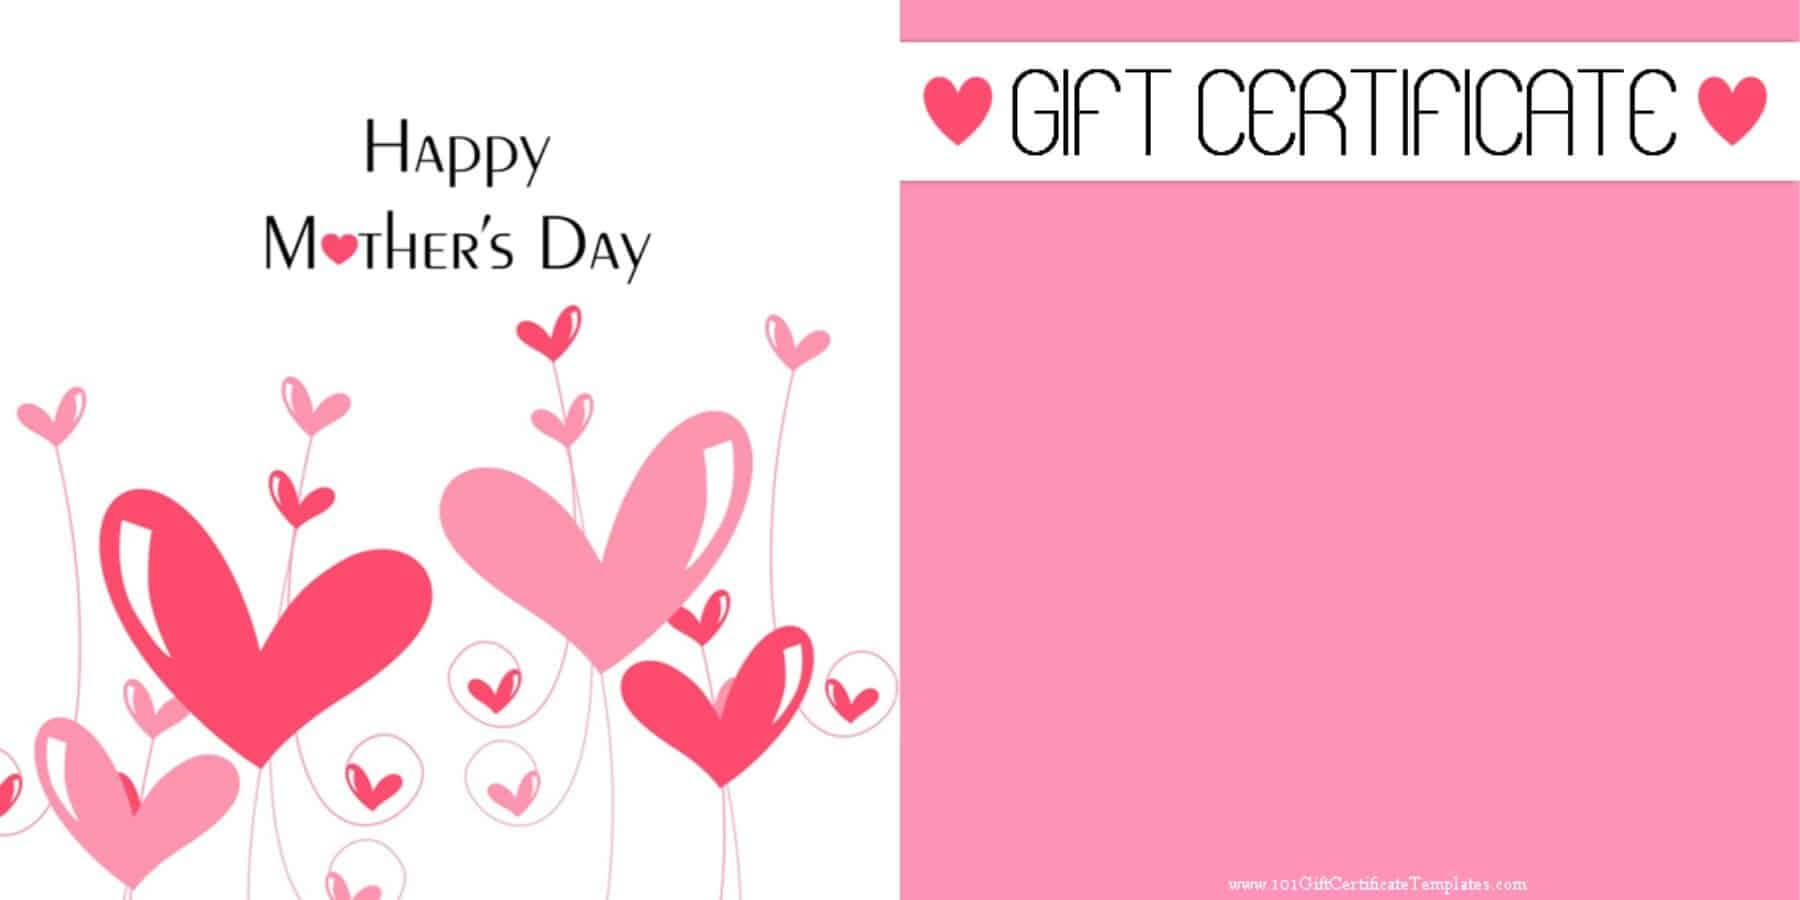 Mother's Day Gift Certificate Templates With Regard To Homemade Christmas Gift Certificates Templates